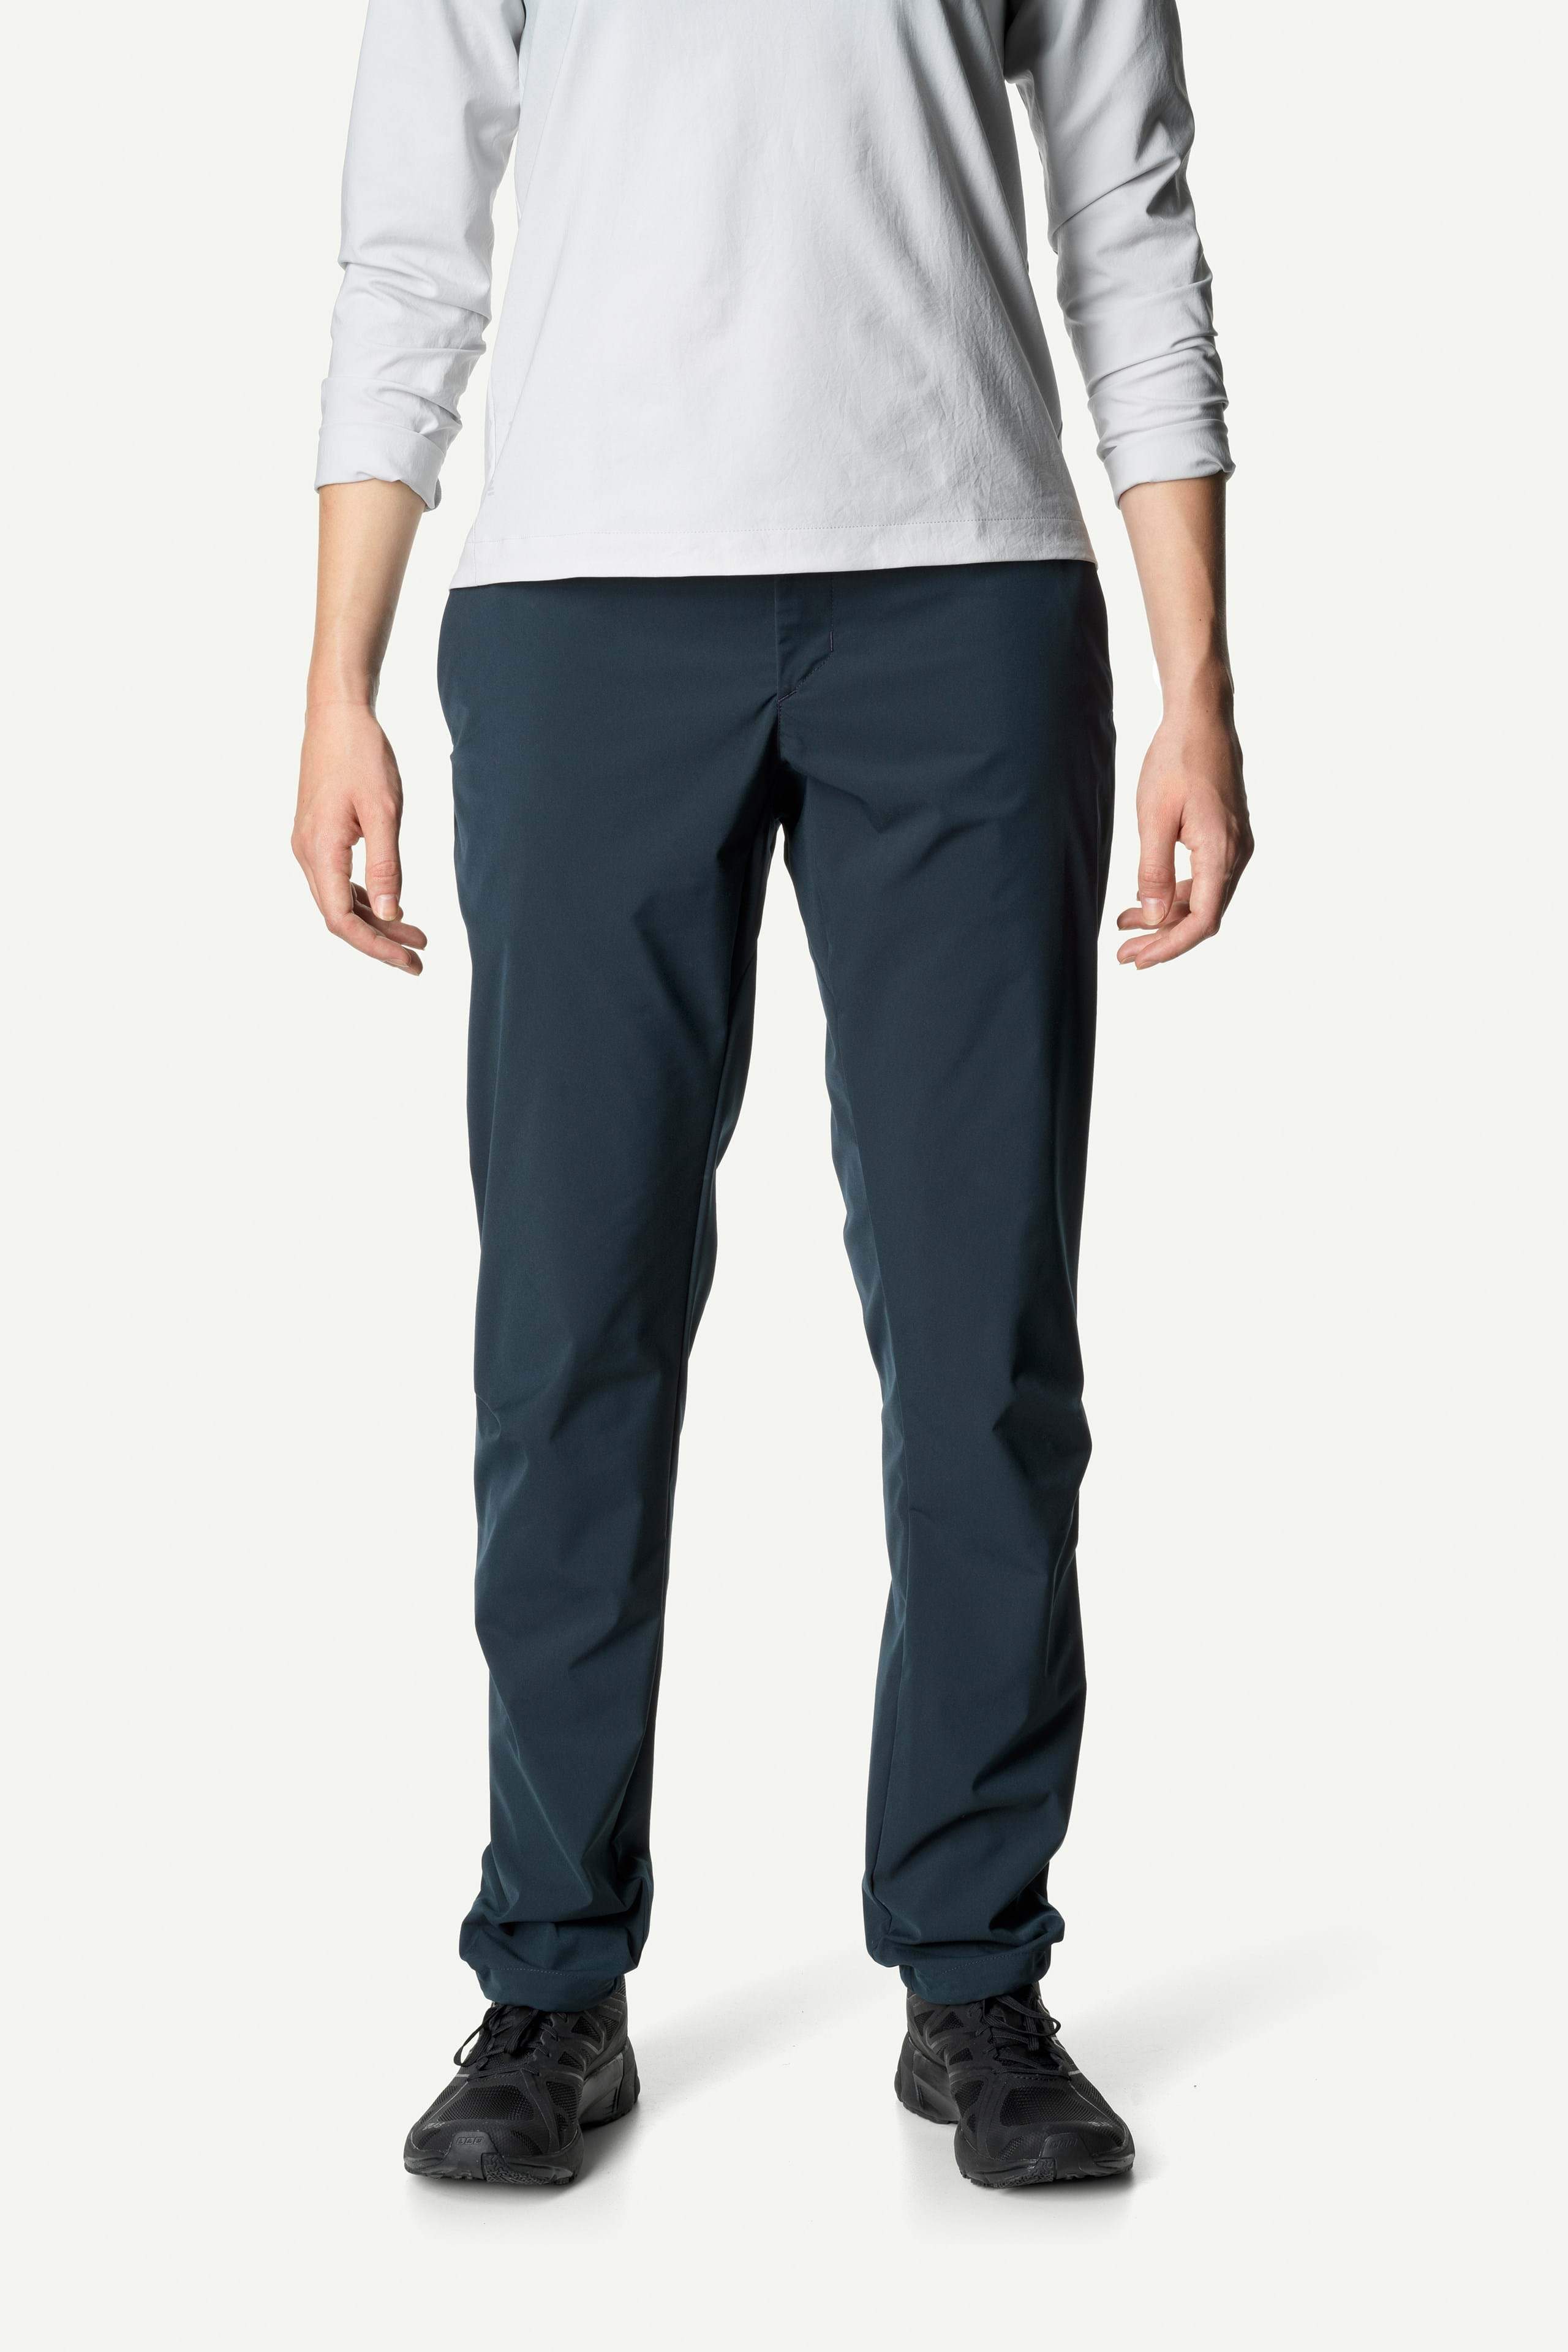 Tentree Mens Twill Jogger Pants, Price Match + 3-Year Warranty